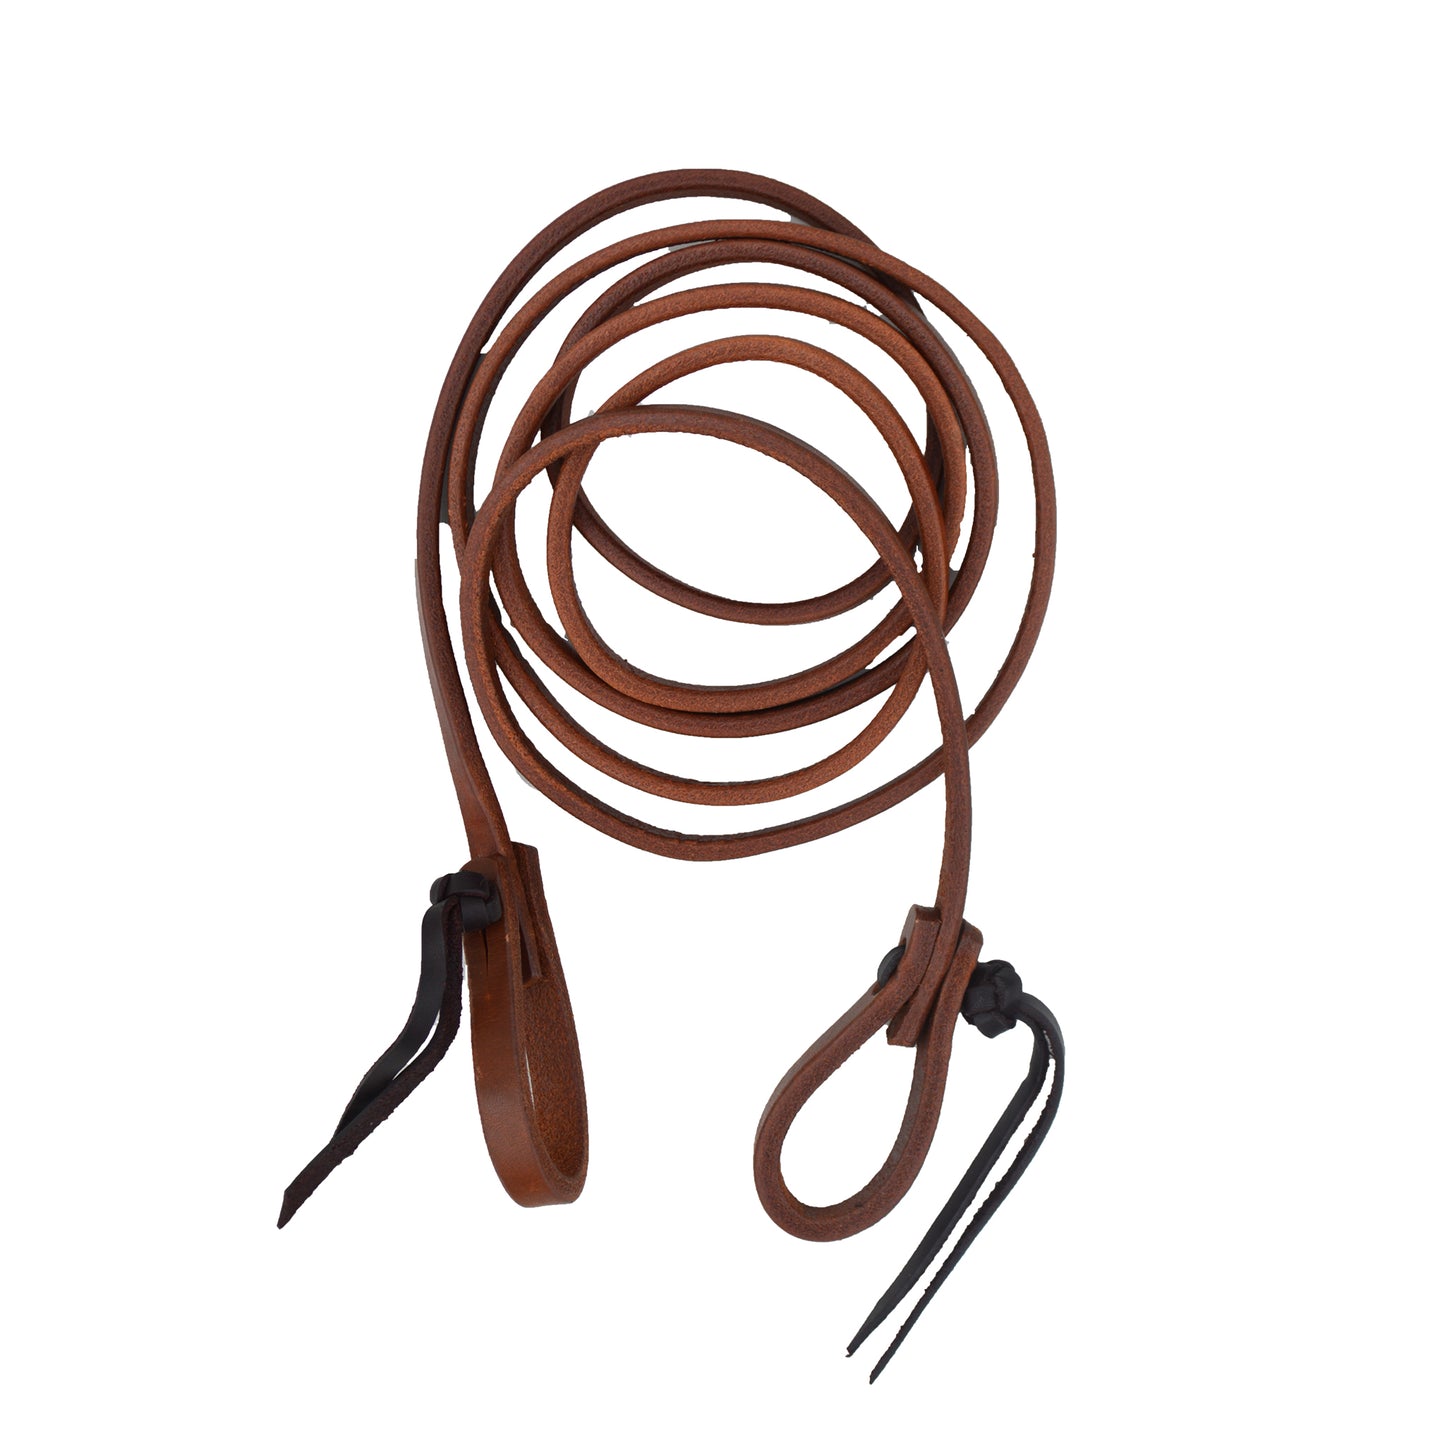 735-HL 1/2" Roping rein oiled latigo leather with knots